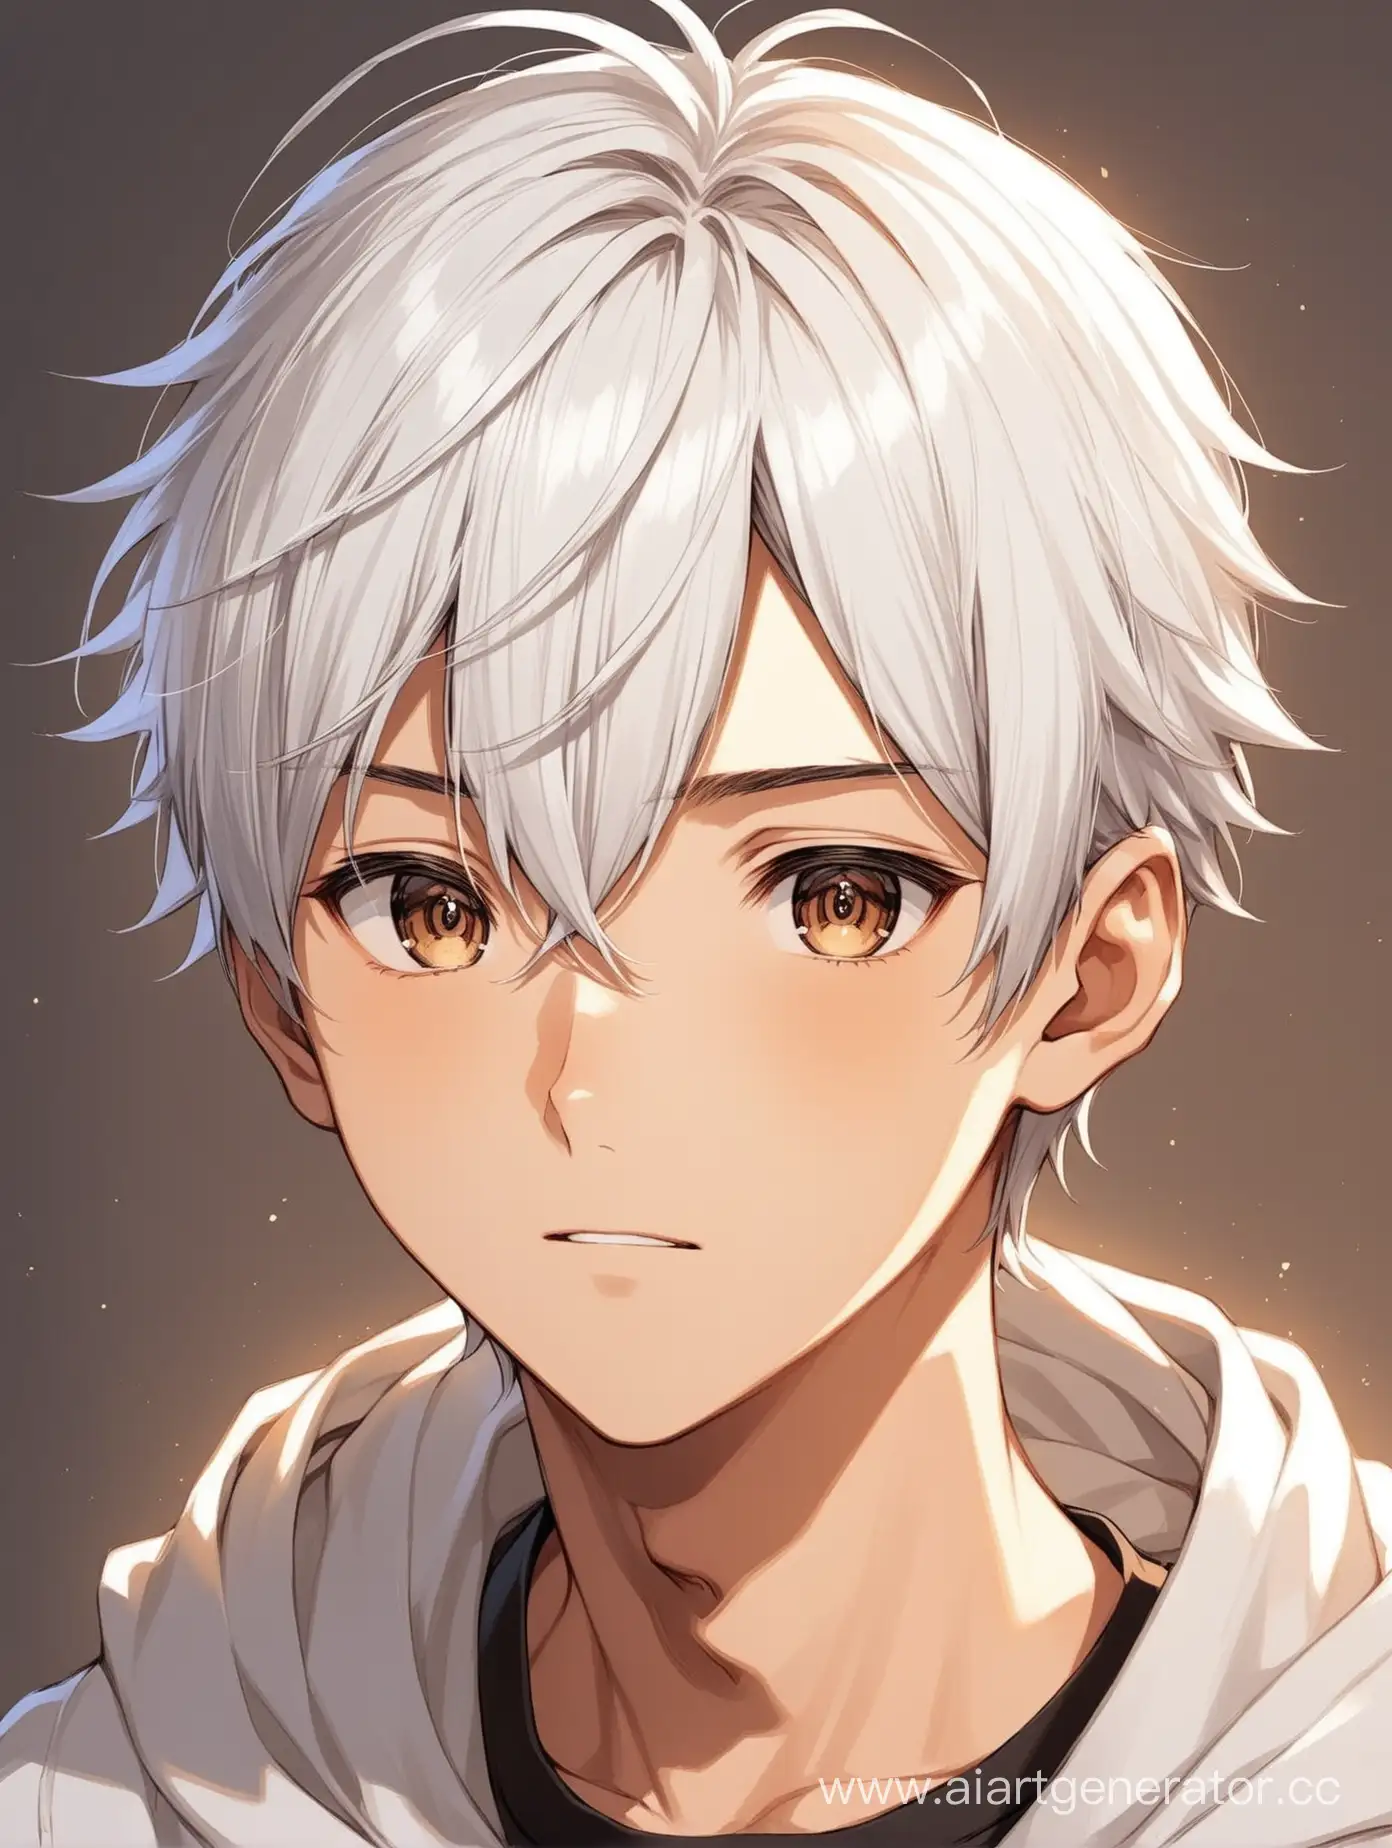 Teenage-Boy-with-White-Hair-and-Brown-Eyes